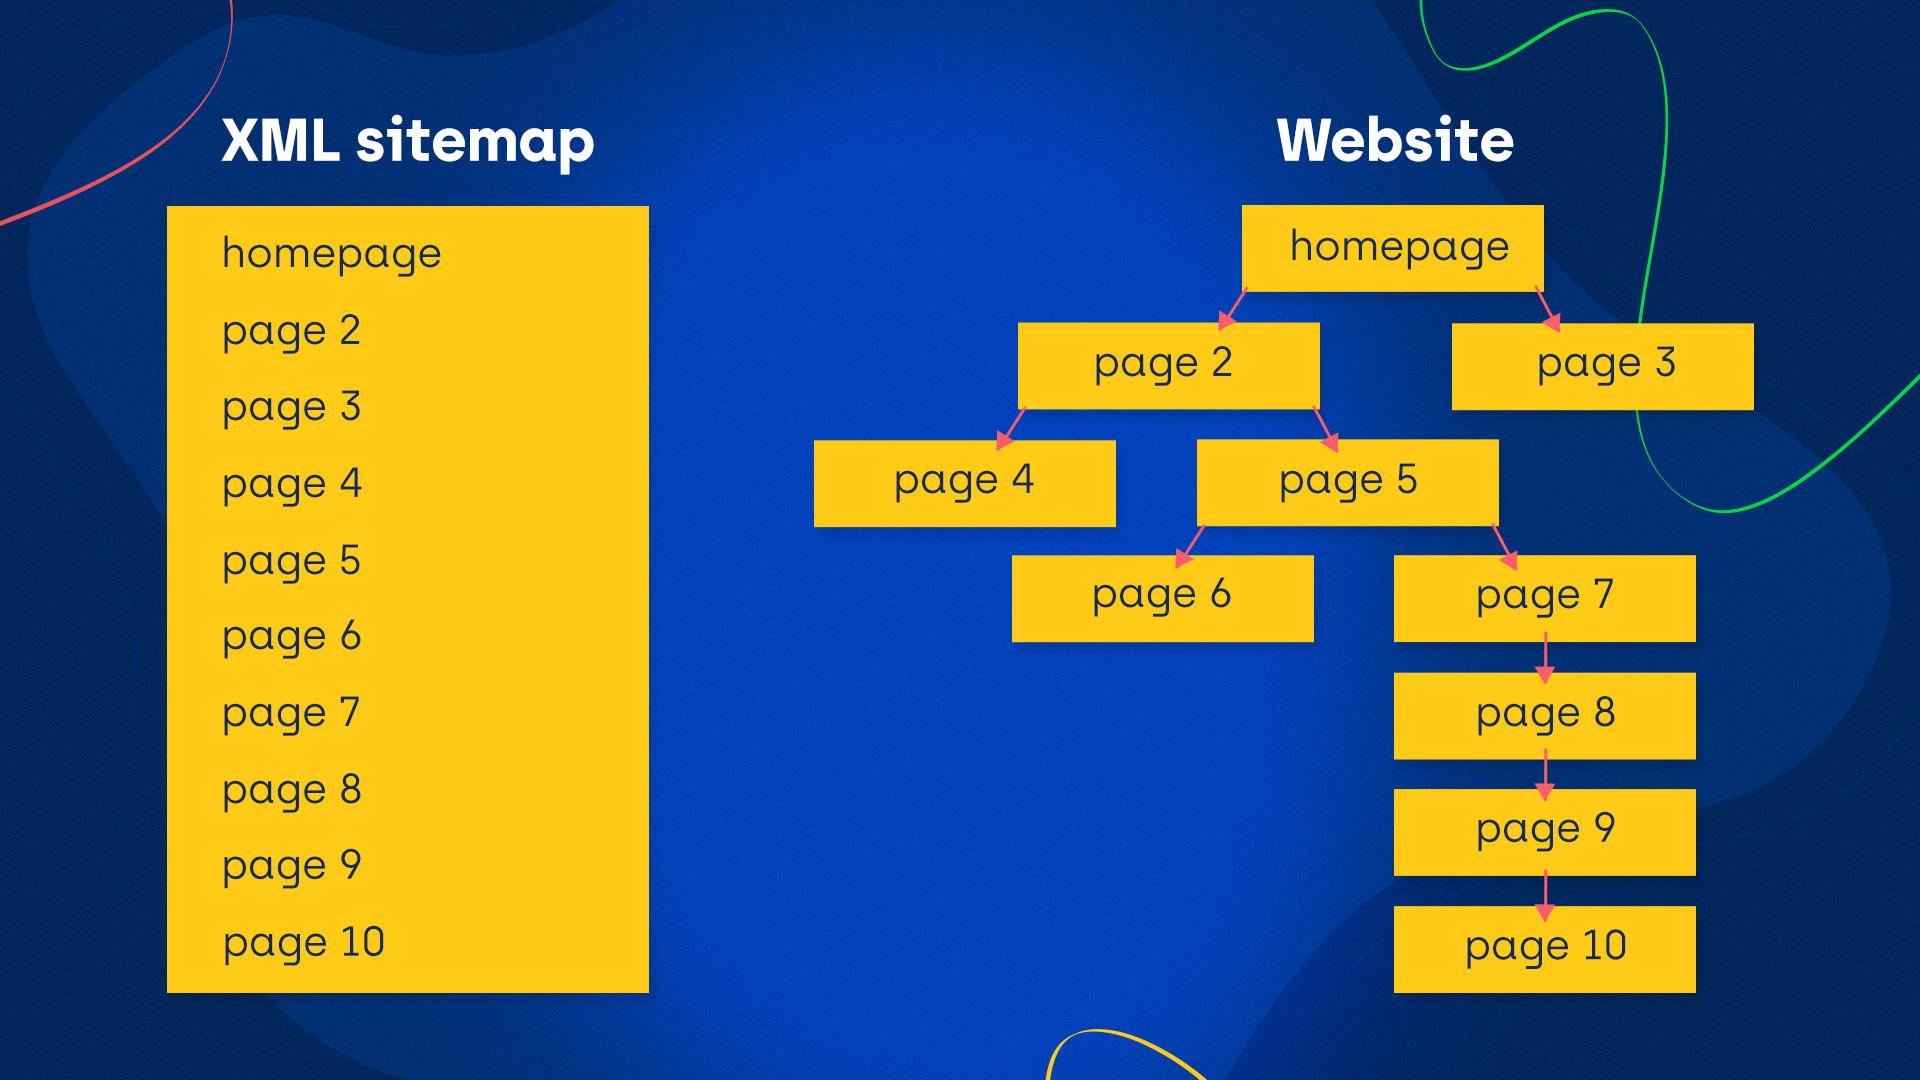 Image presenting a list of URLs vs. diagram with a real structure of pages on a website 